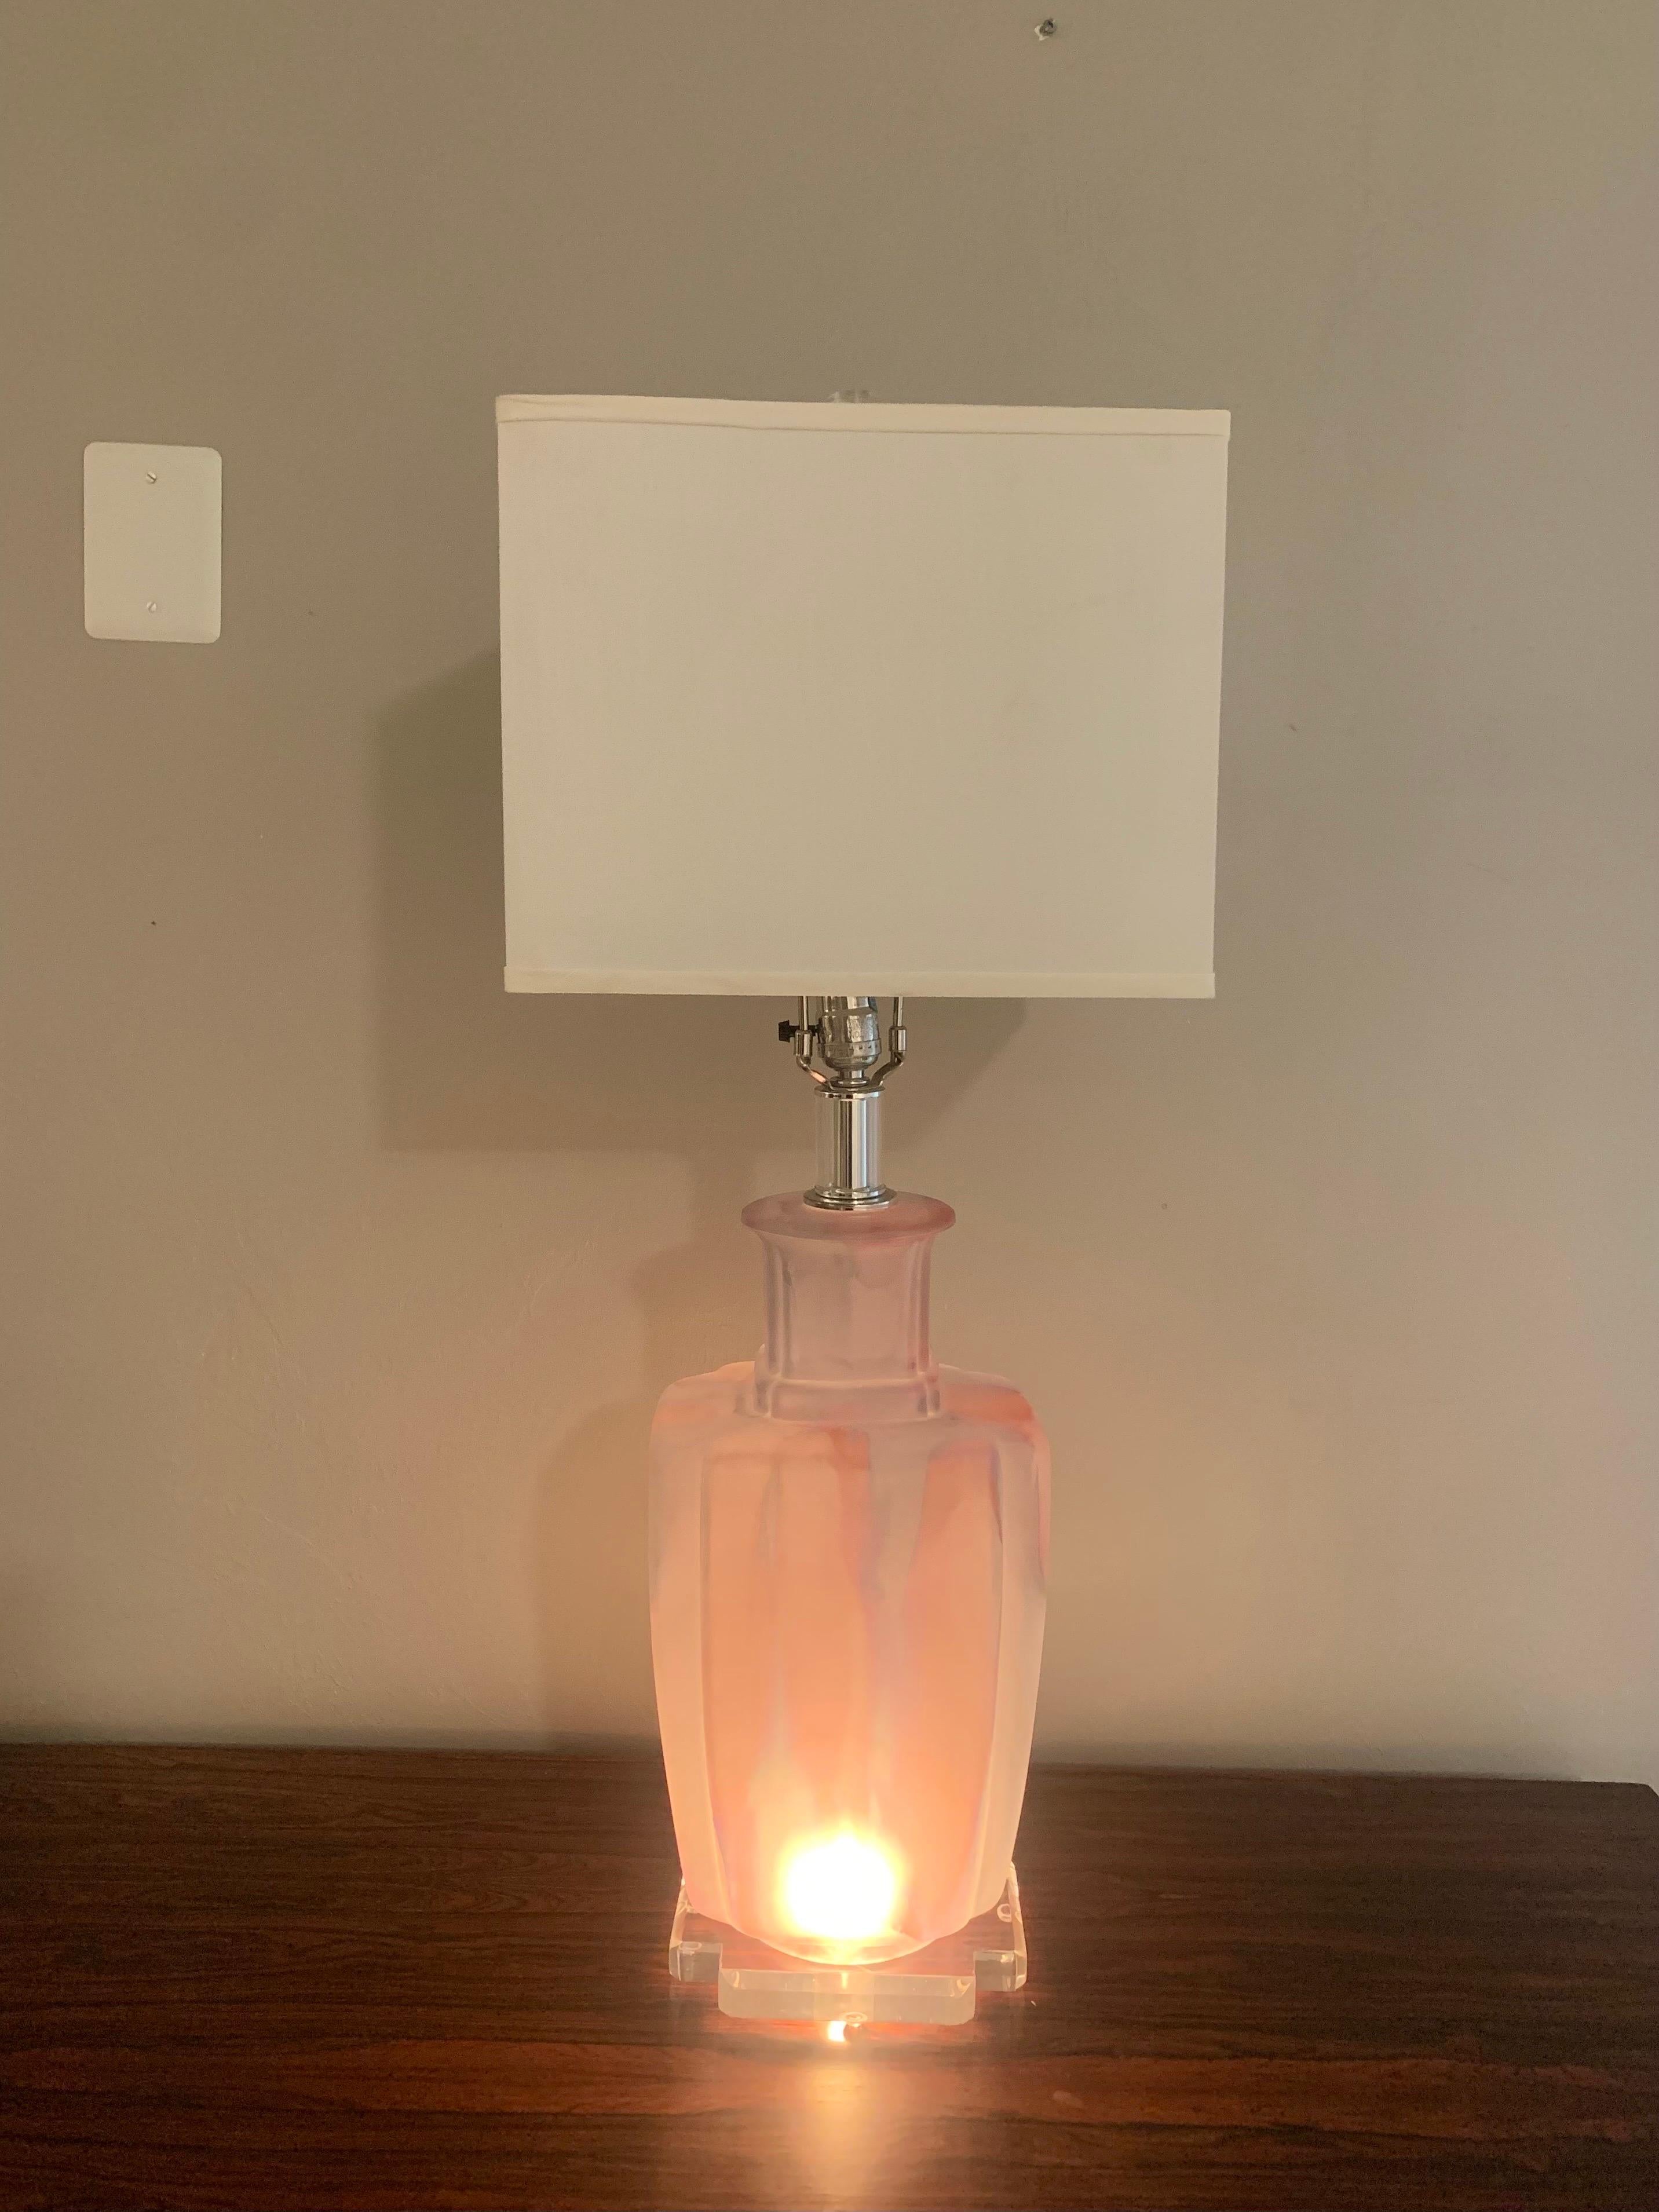 Mid century modern Bauer table lamp. Beautifully made from swirling glass with pinks, whites, and clear glass. Lucite base and finial with chrome accents.

Has a light in the glass as well for better mood lighting. Lamp has multiple lighting